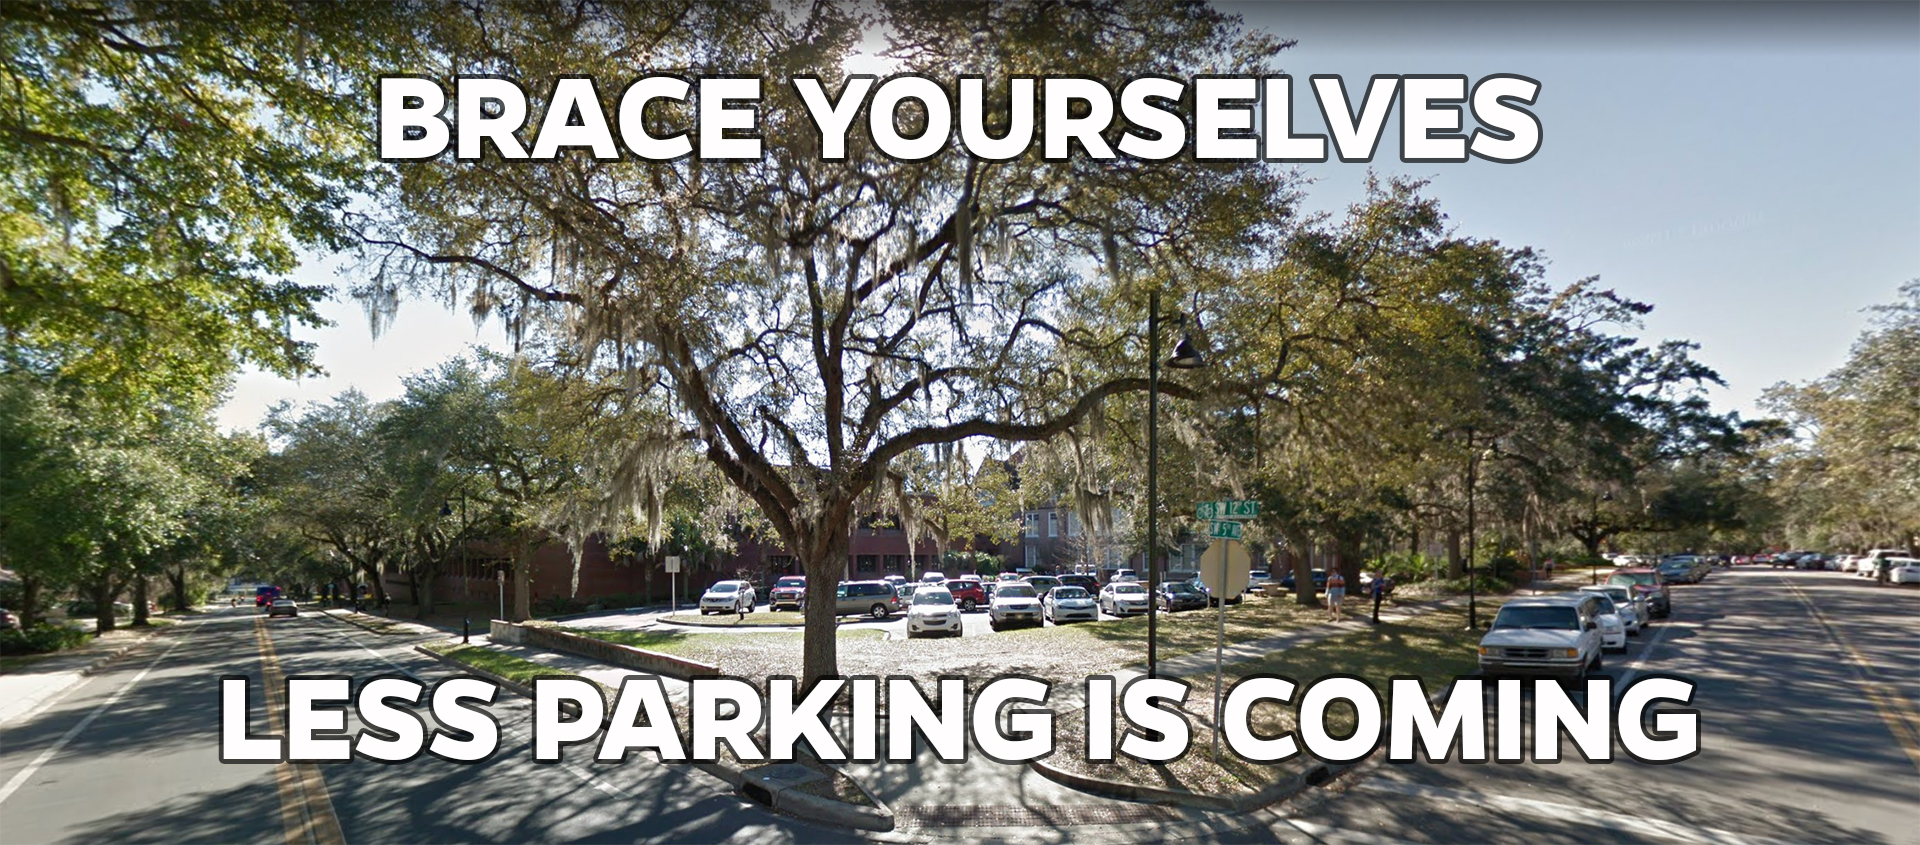 Norman Hall Small Parking Lot Meme